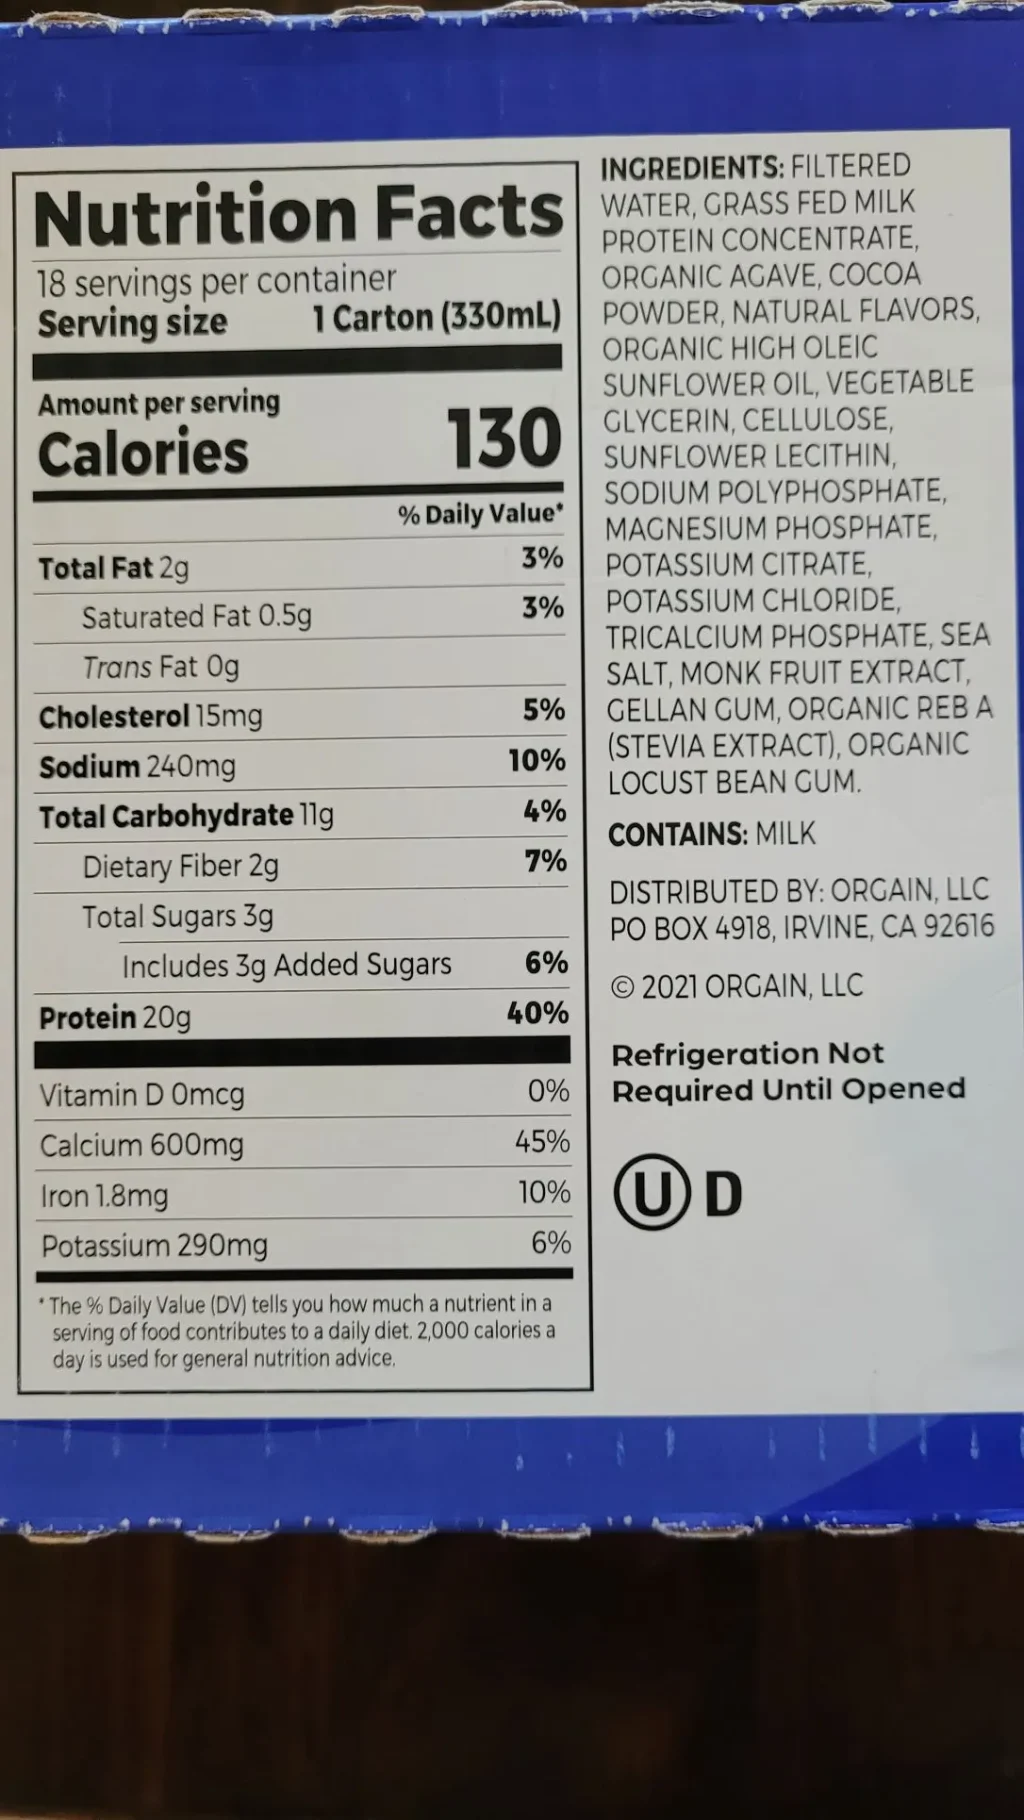 Orgain's nutrition label and ingredients list